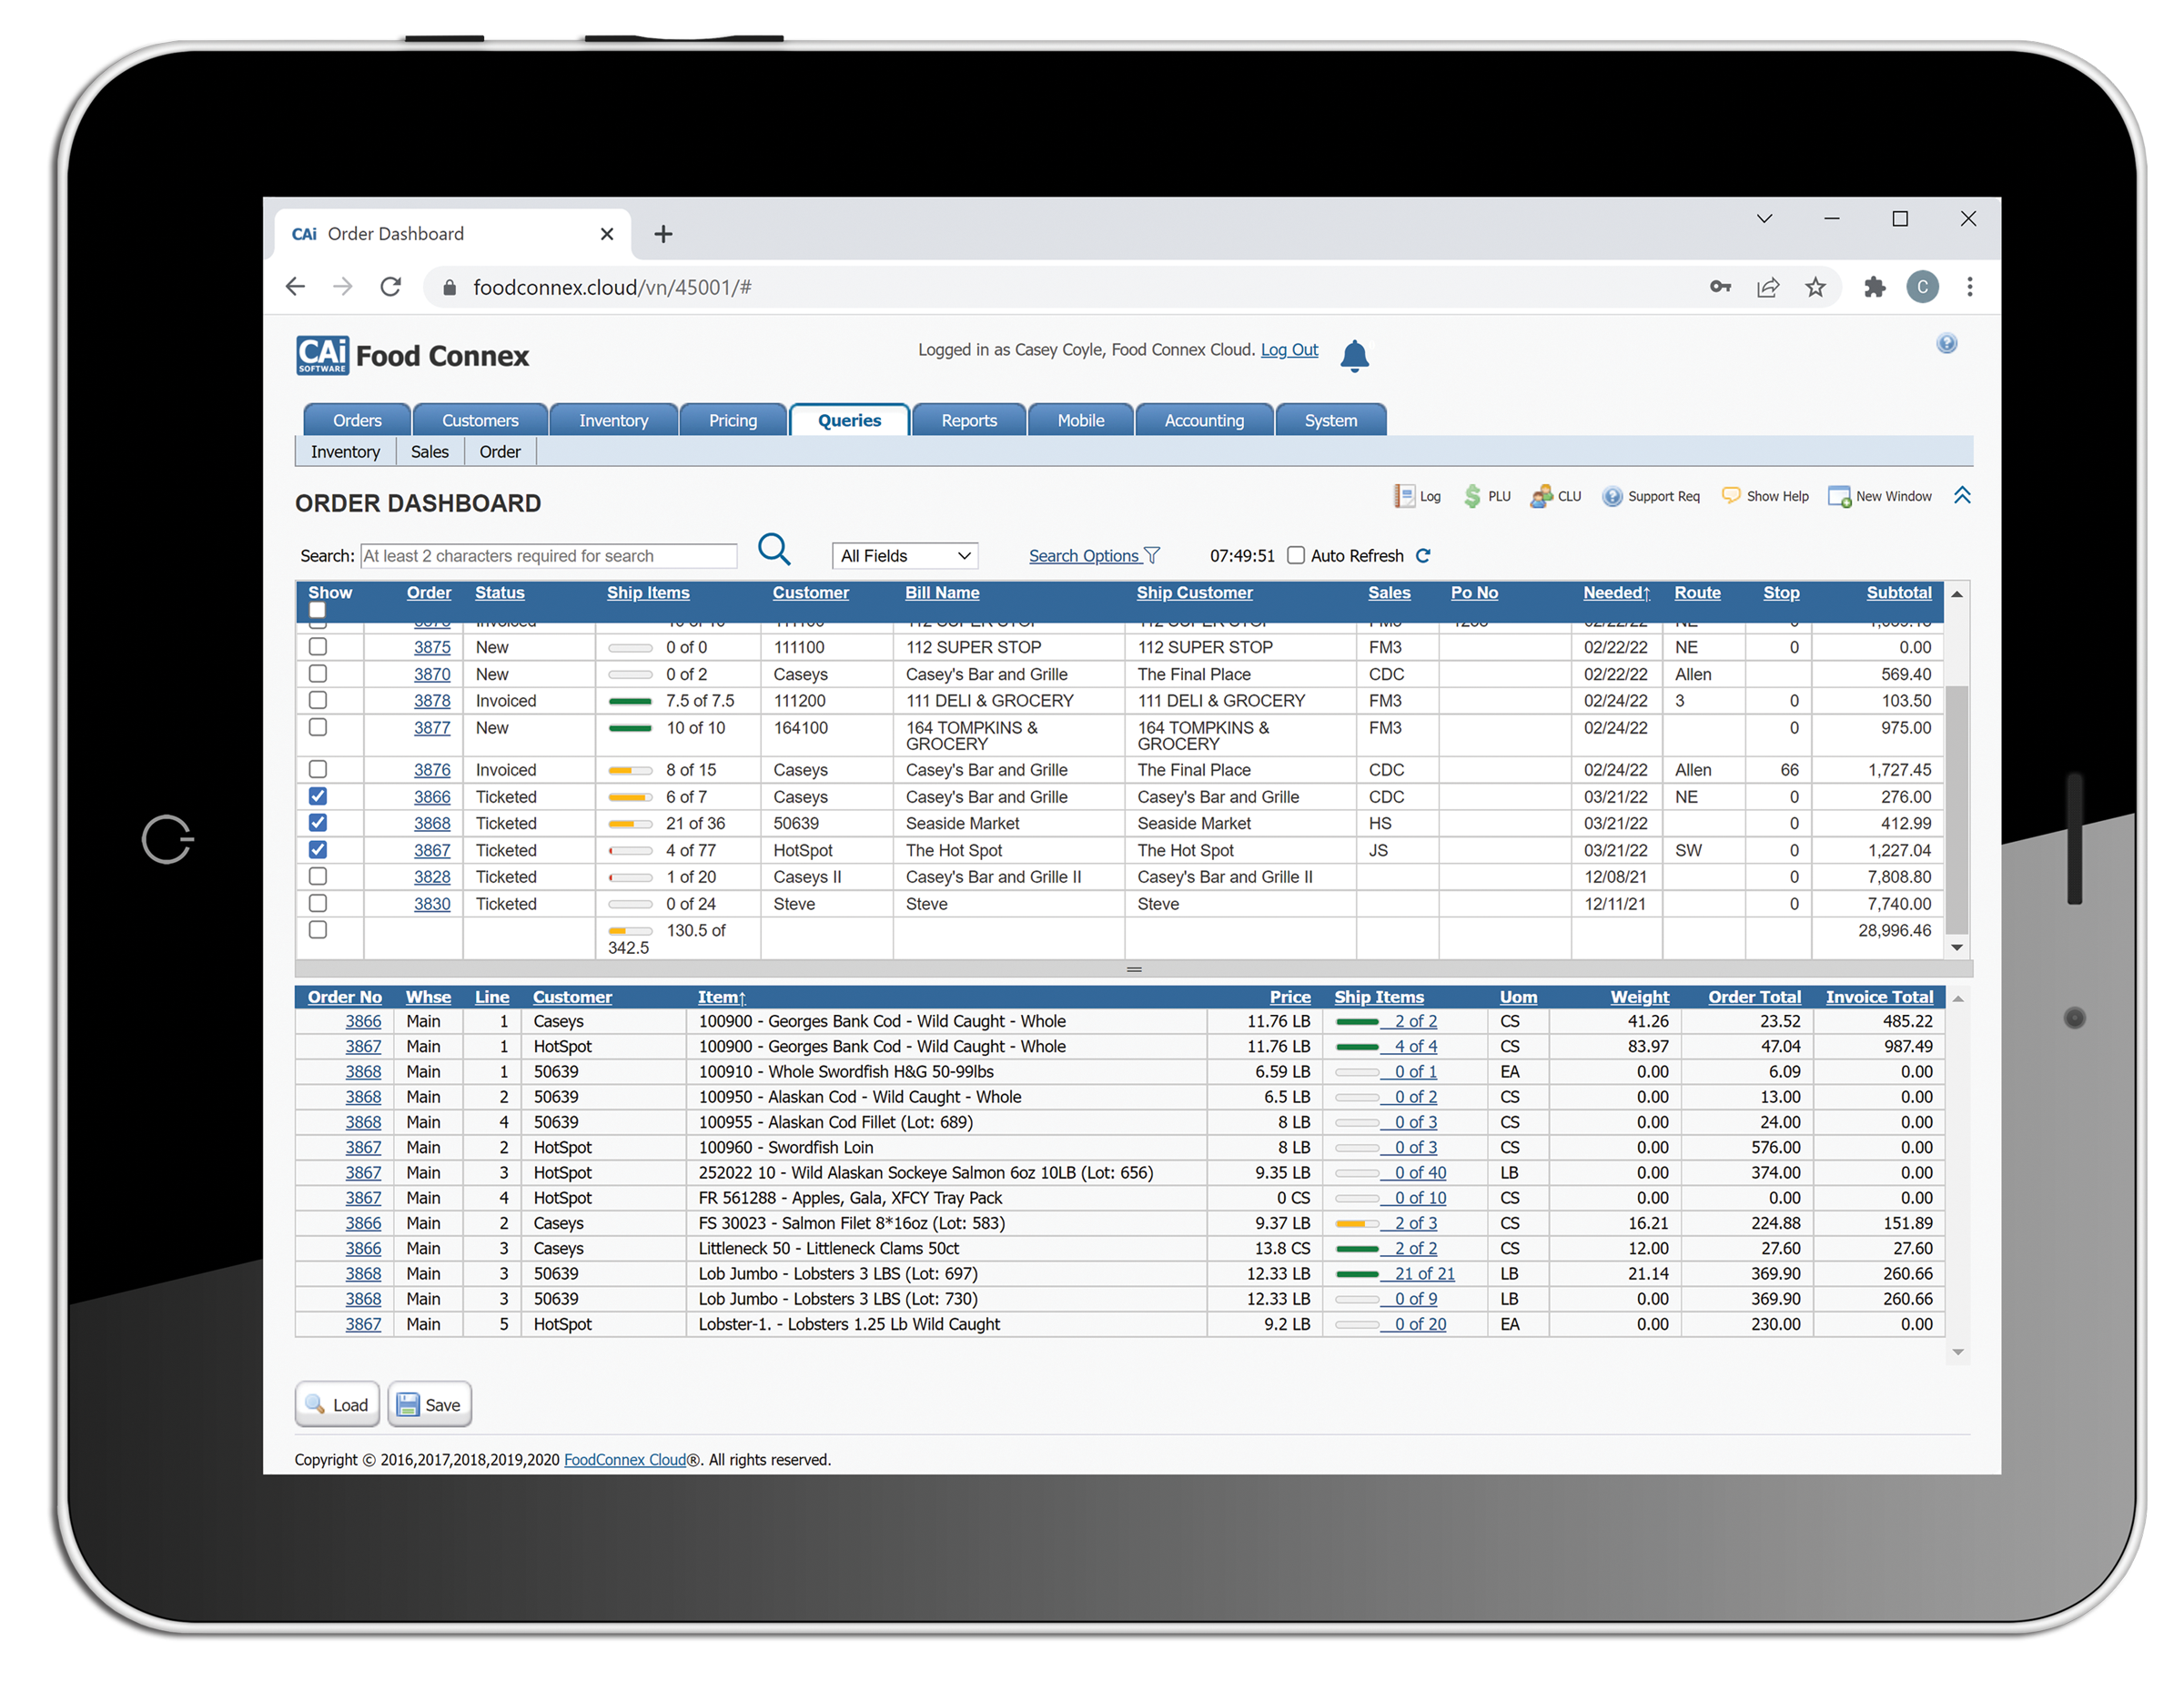 Food Connex lets you easily manage orders in a simple customizable screen that displays historical order information, current inventory availability, and pricing information. Intuitive prompts help you quickly create orders and recommended items.